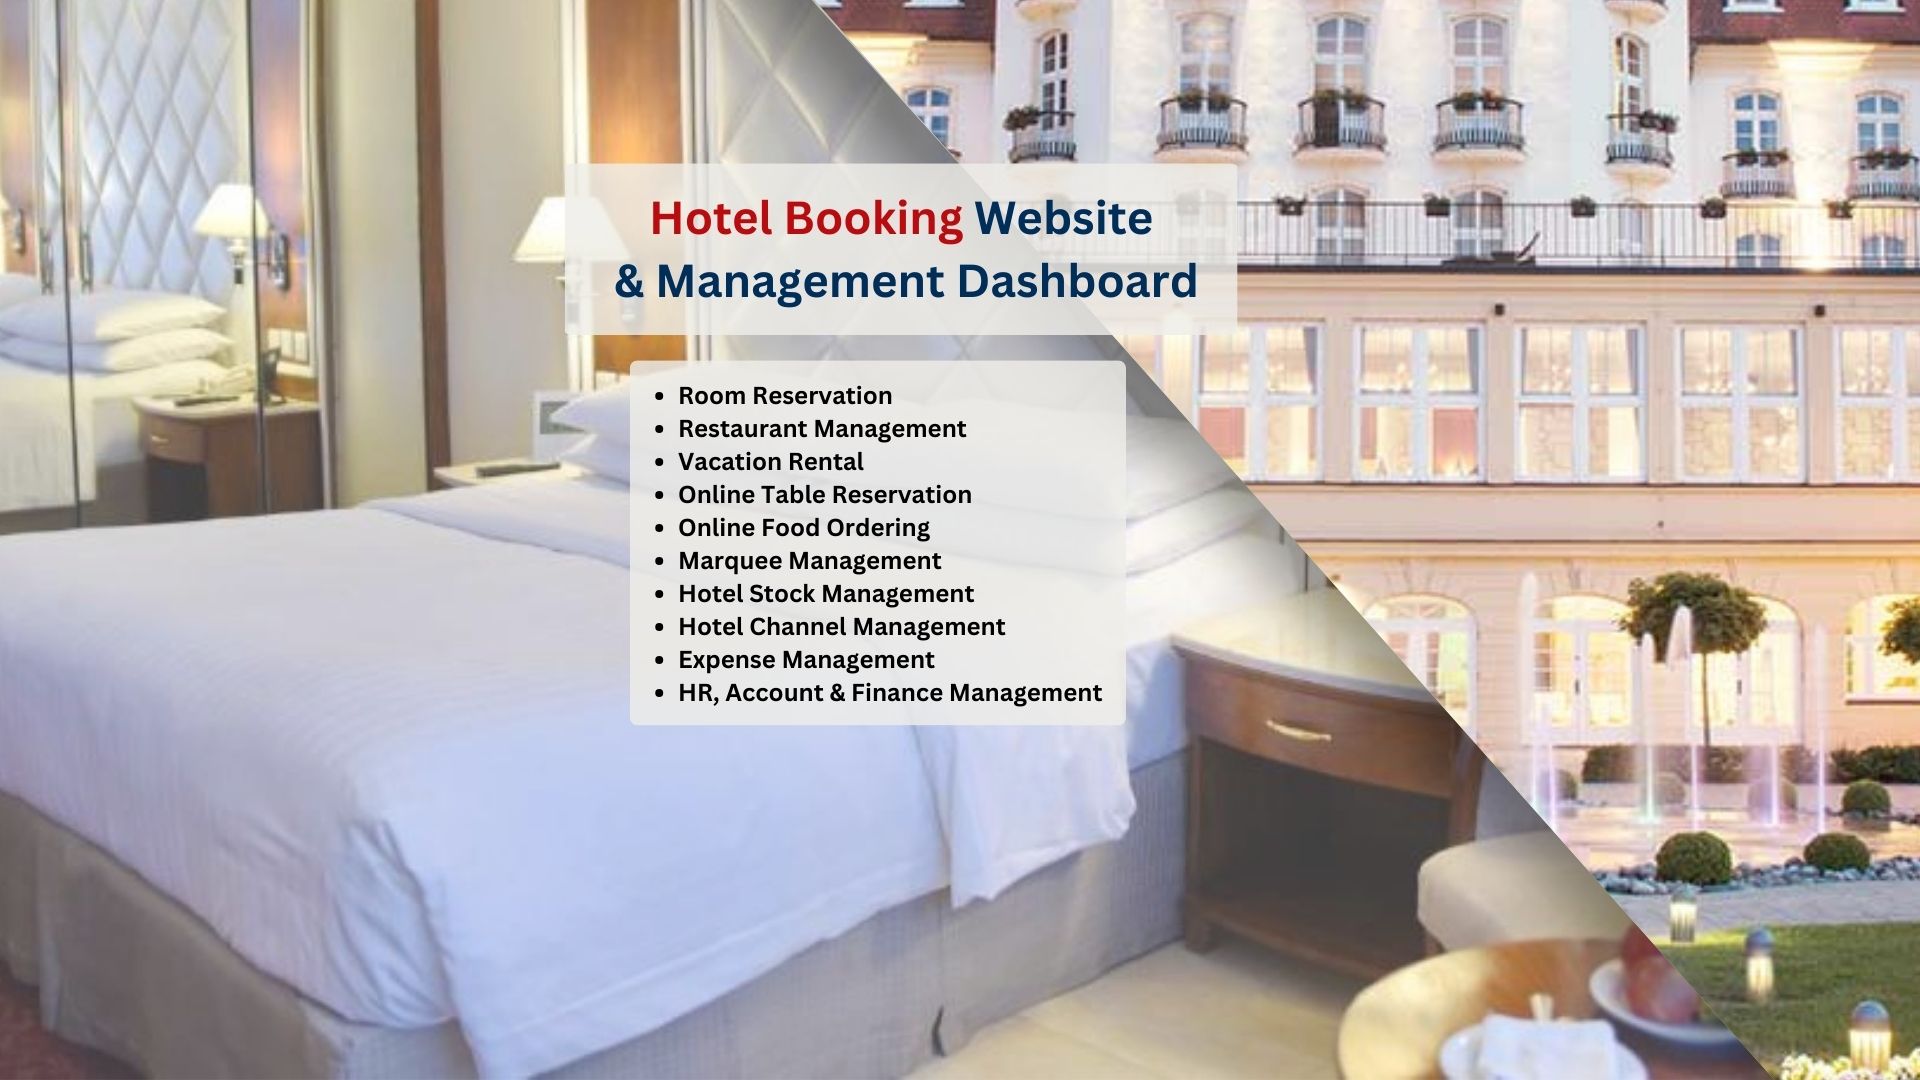 hotel booking website and management dashboard - nizisolutions.com